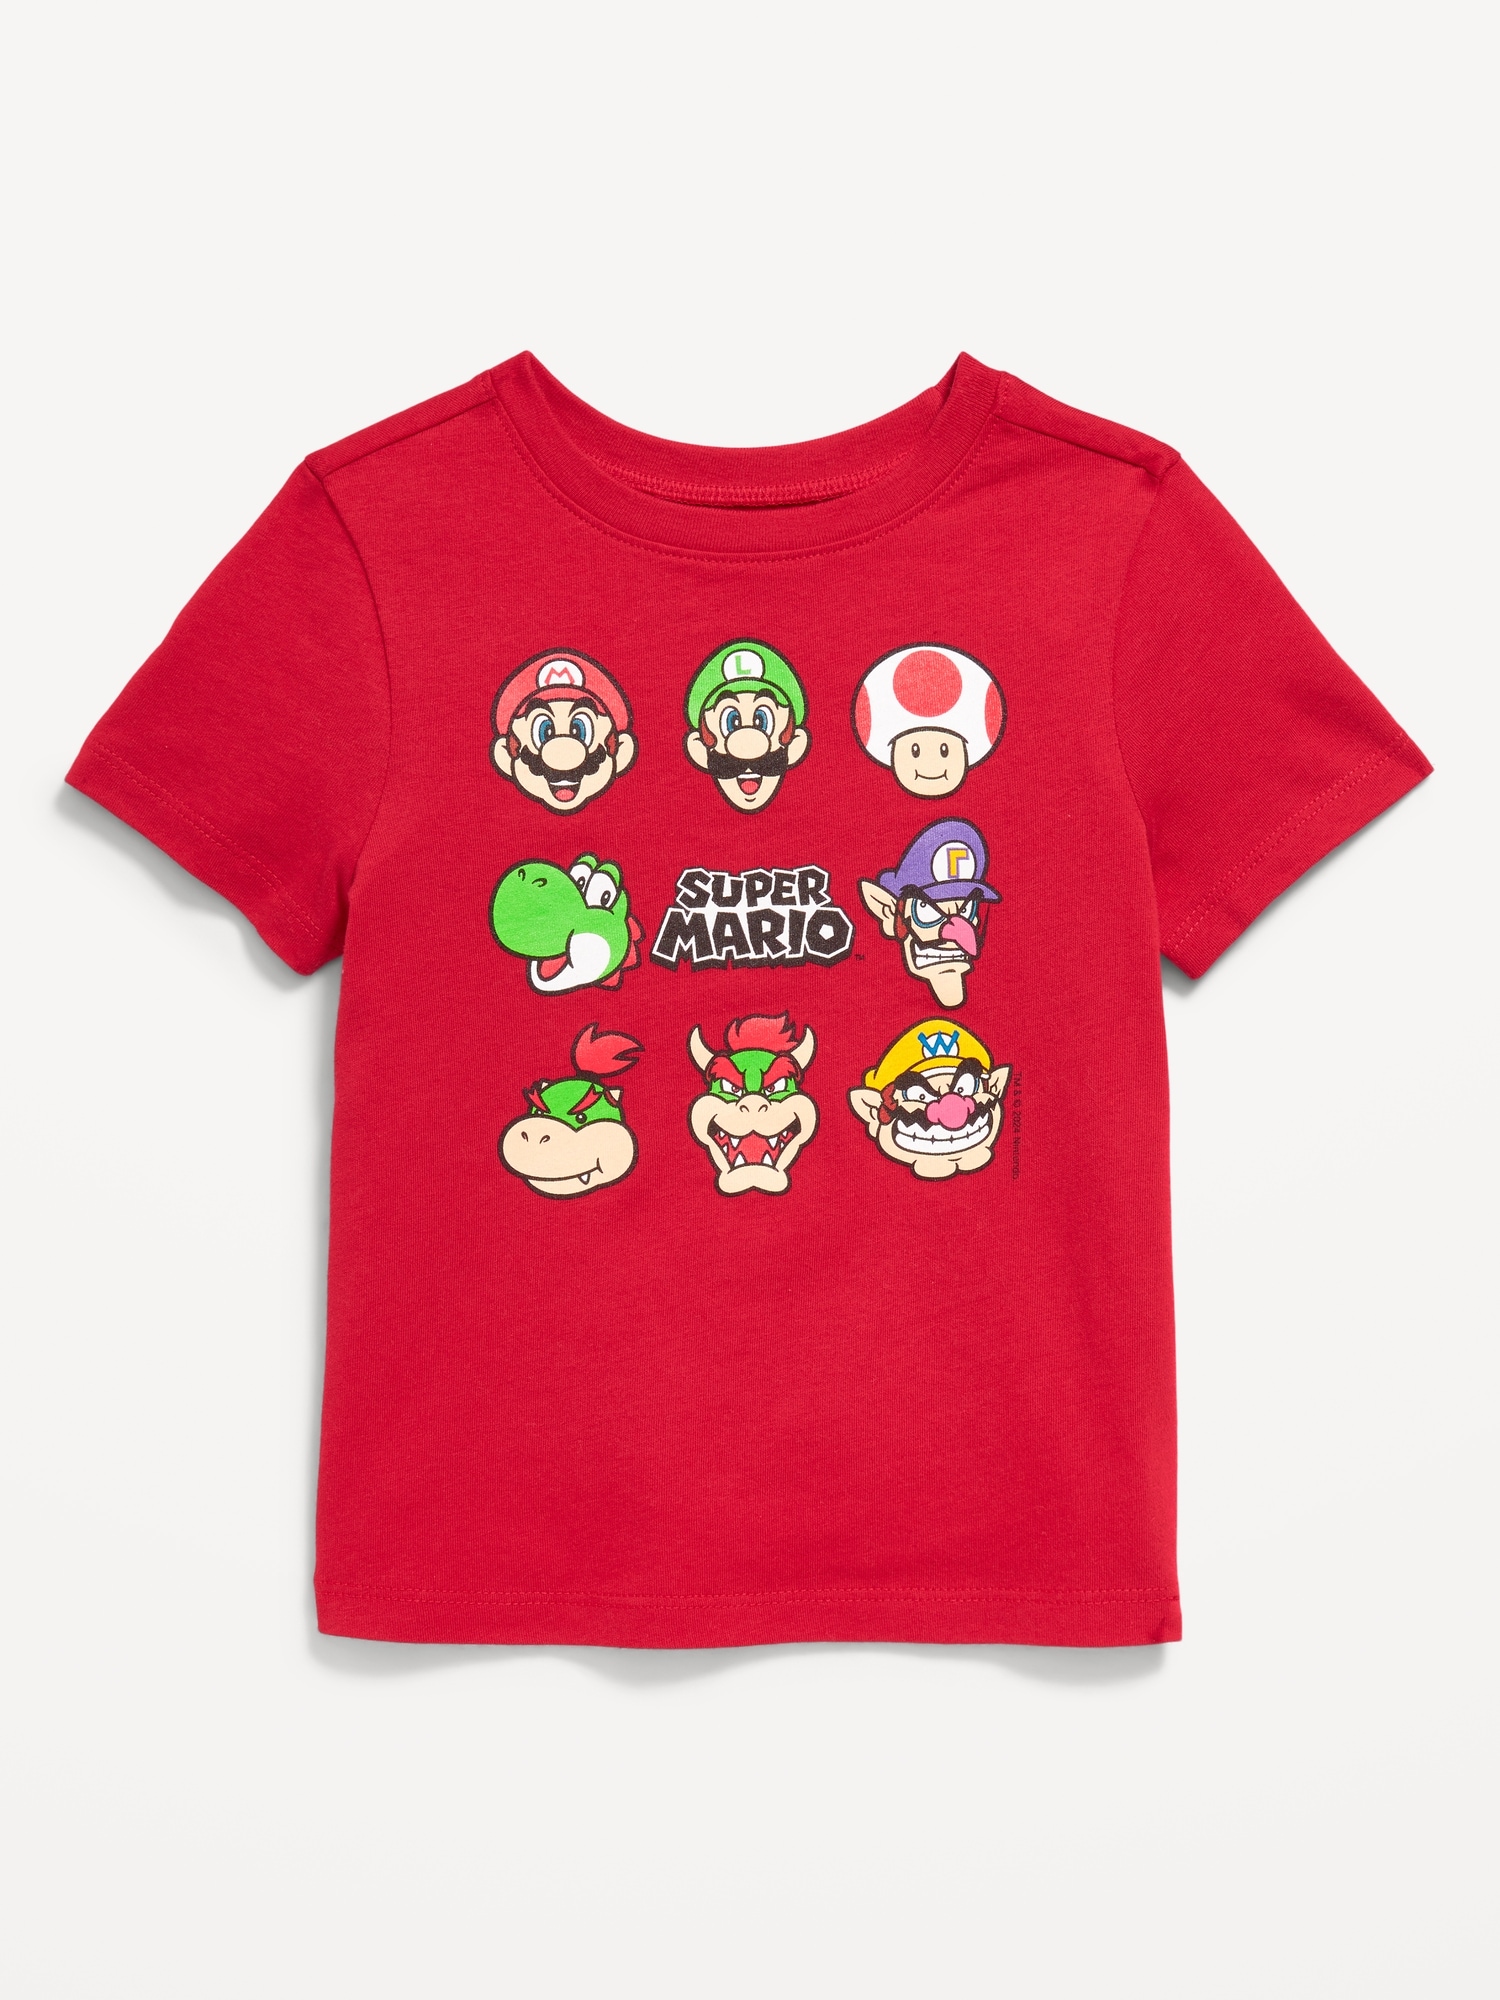 Super Mario Unisex Graphic T-Shirt for Toddler Hot Deal